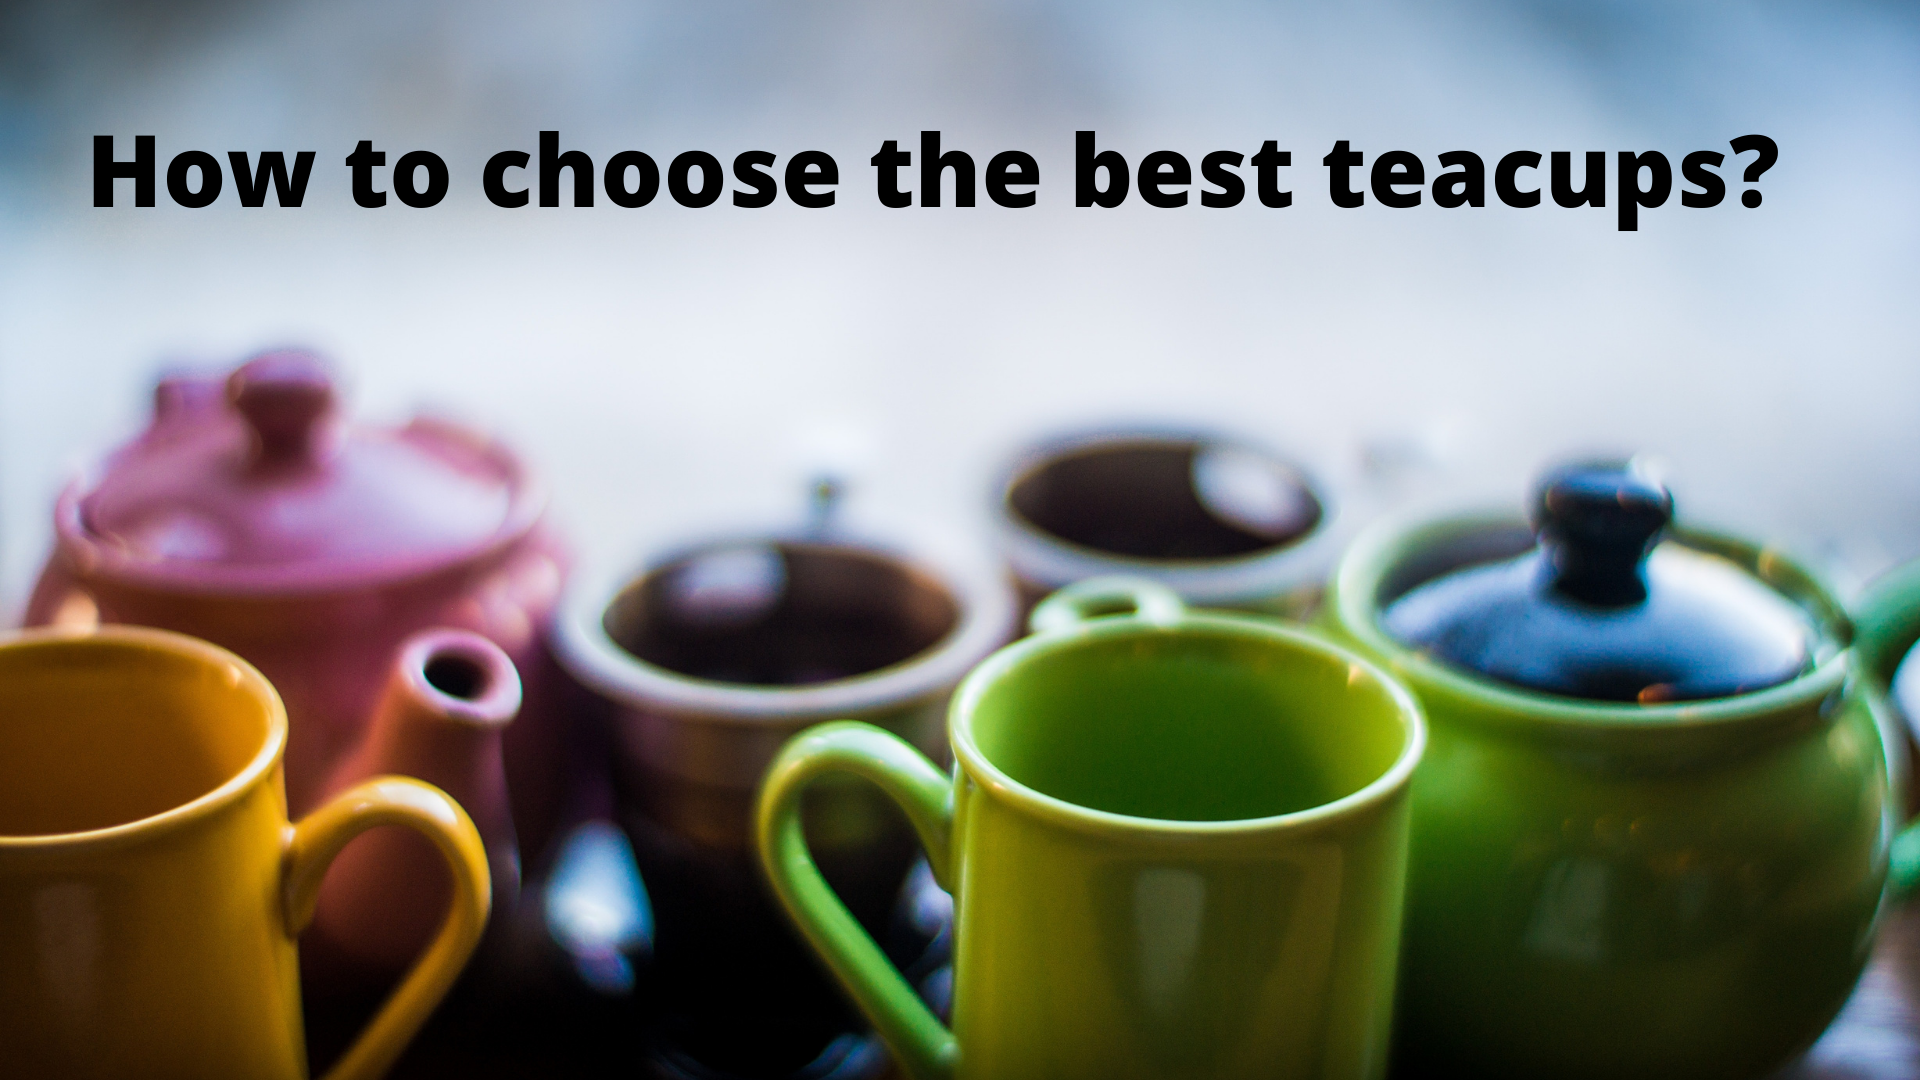 How to choose the best teacups?